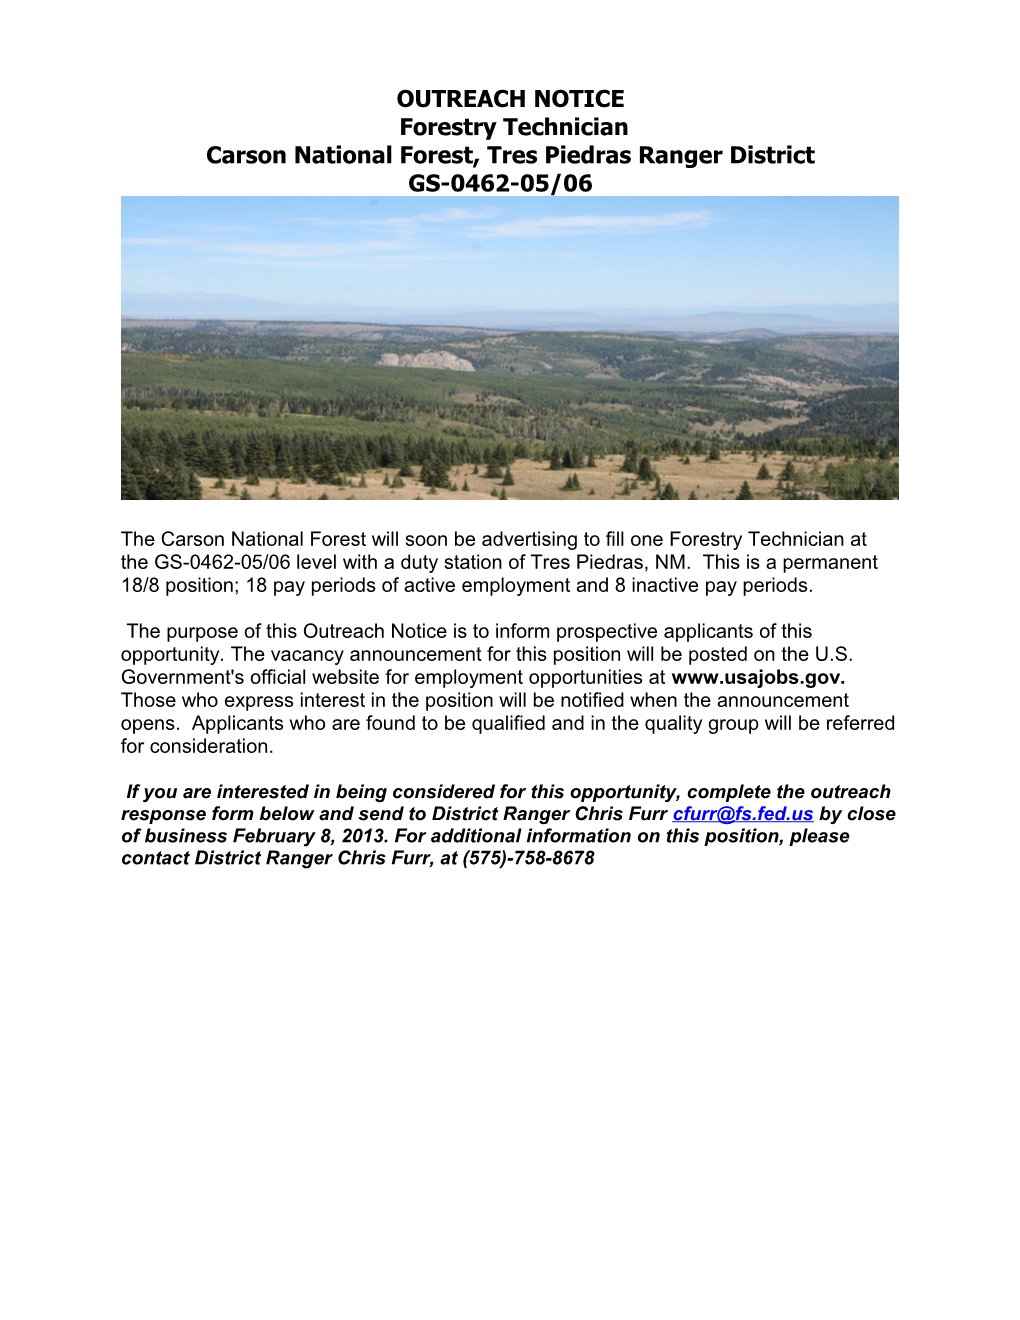 Carson National Forest, Tres Piedras Ranger District